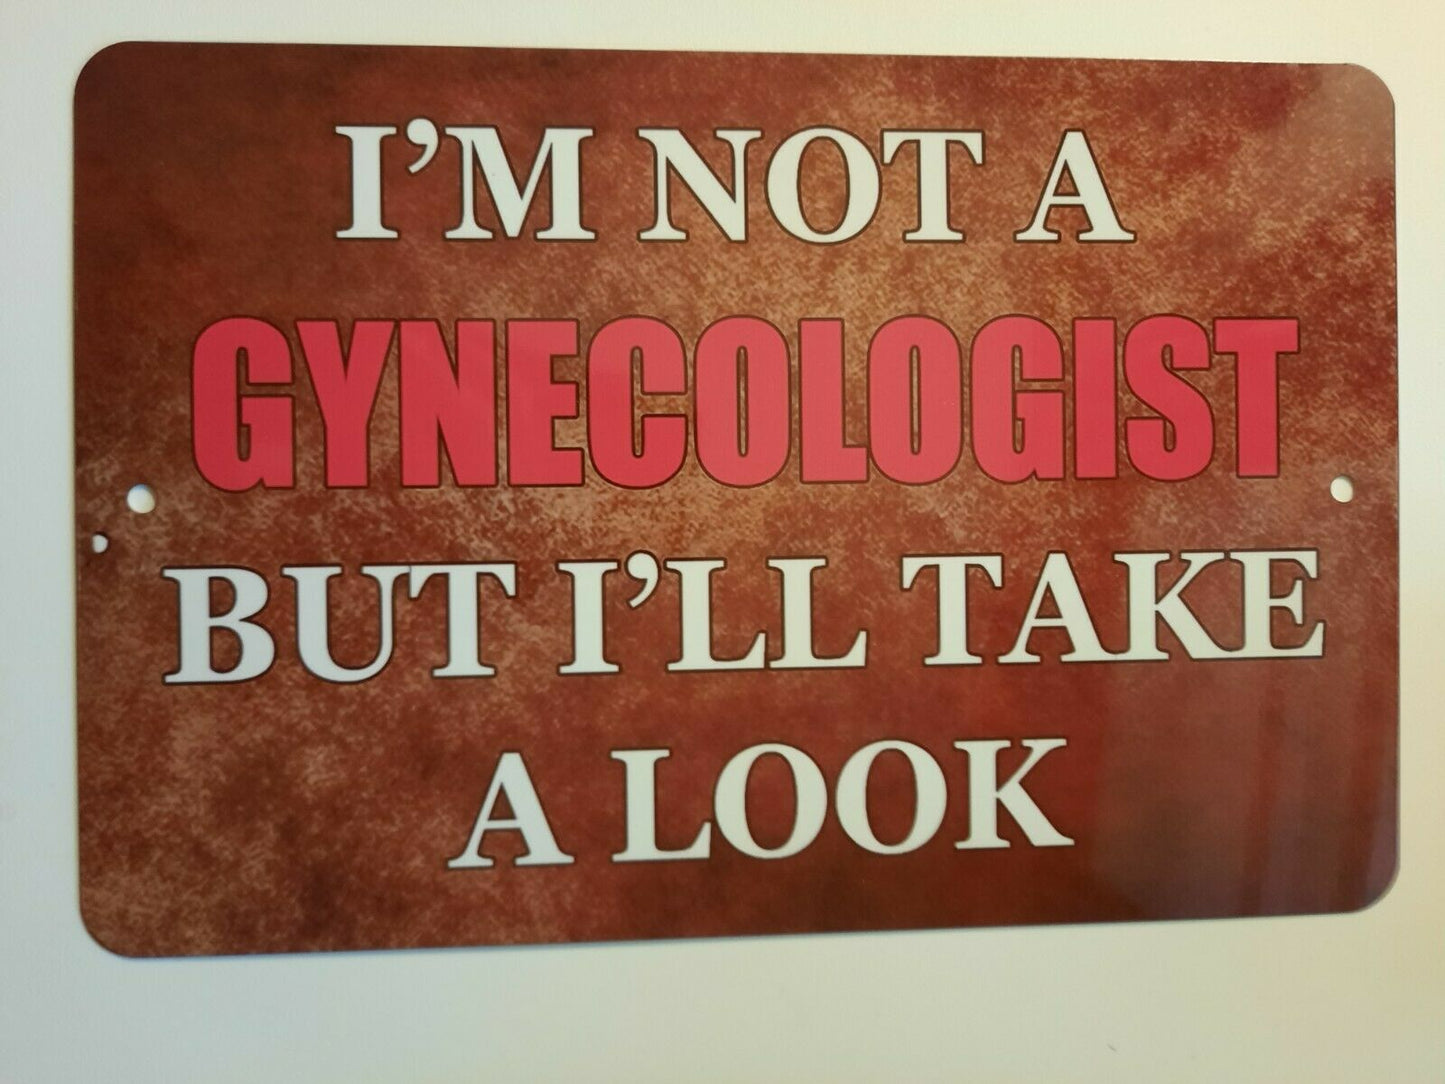 Im Not a Gynecologist But Ill Take a Look 8x12 Metal Wall Sign Funny Misc Poster